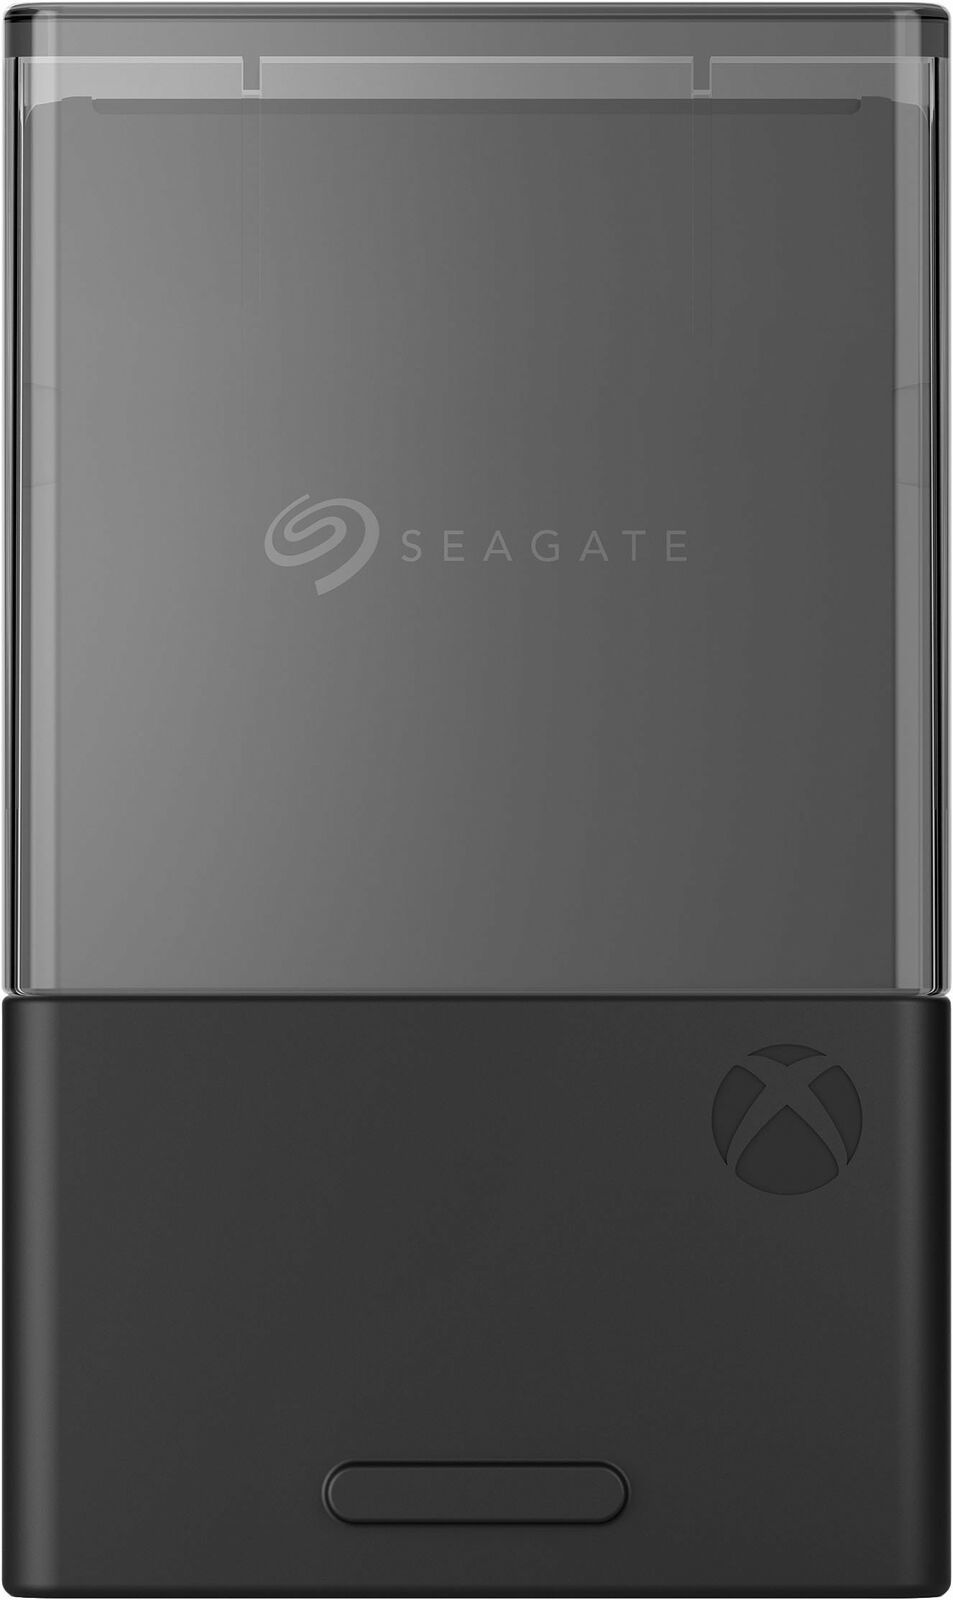 Seagate - 2TB Storage Expansion Card for Xbox Series X|S Internal NVMe SSD - ... - $417.99